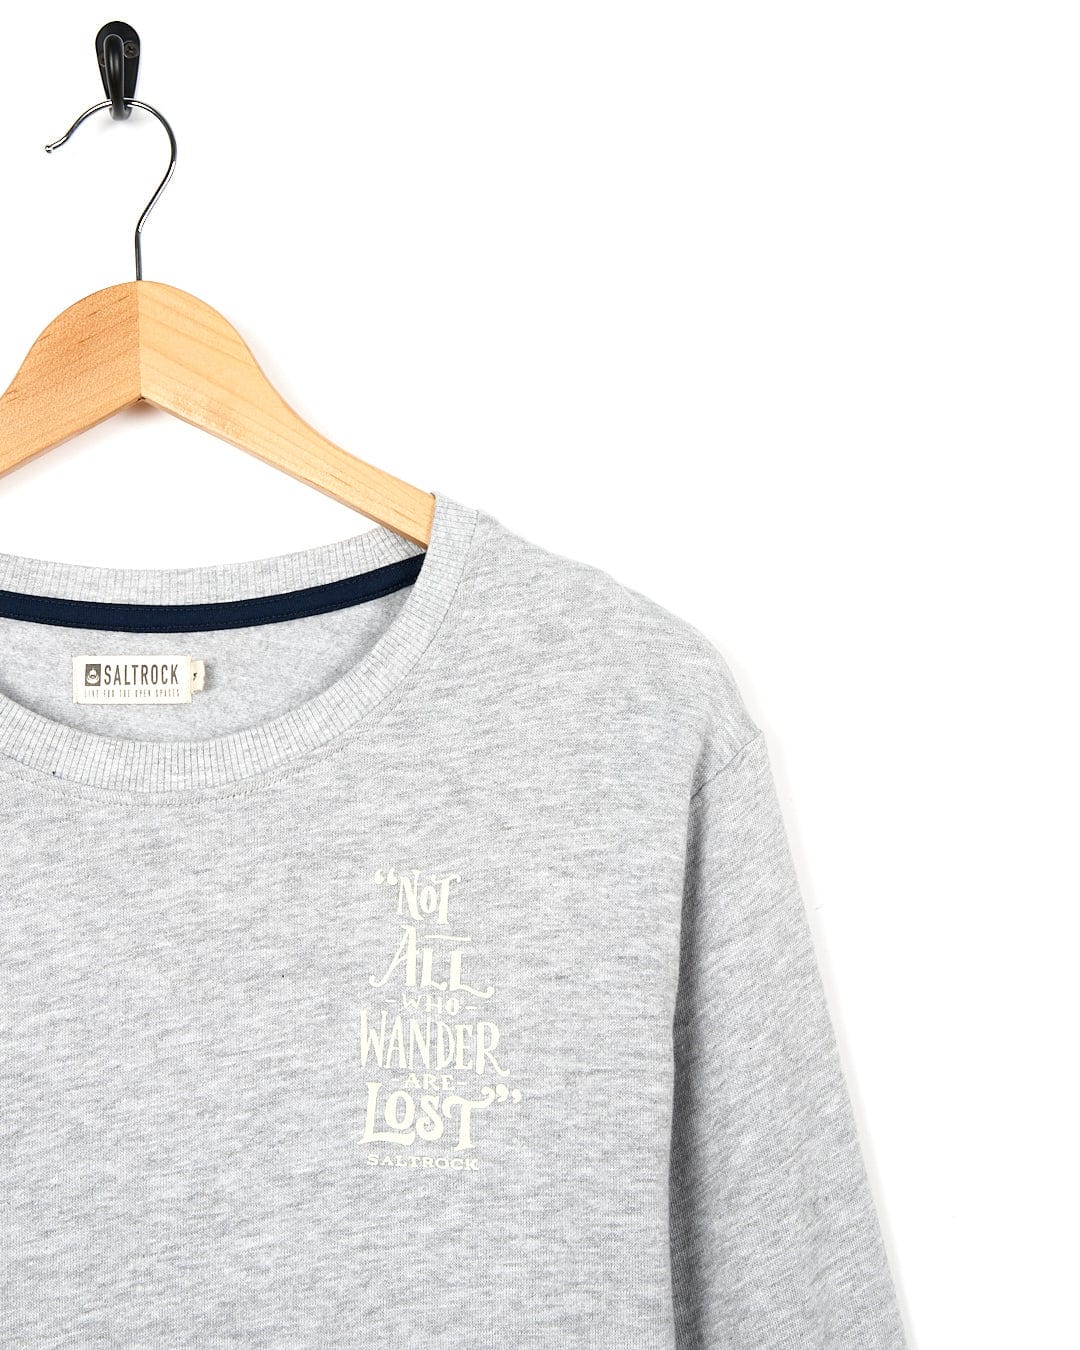 A Lost Ships - Mens Crew Sweat - Grey sweatshirt with the words 'we all wander lost' embroidered on it. (Brand: Saltrock)